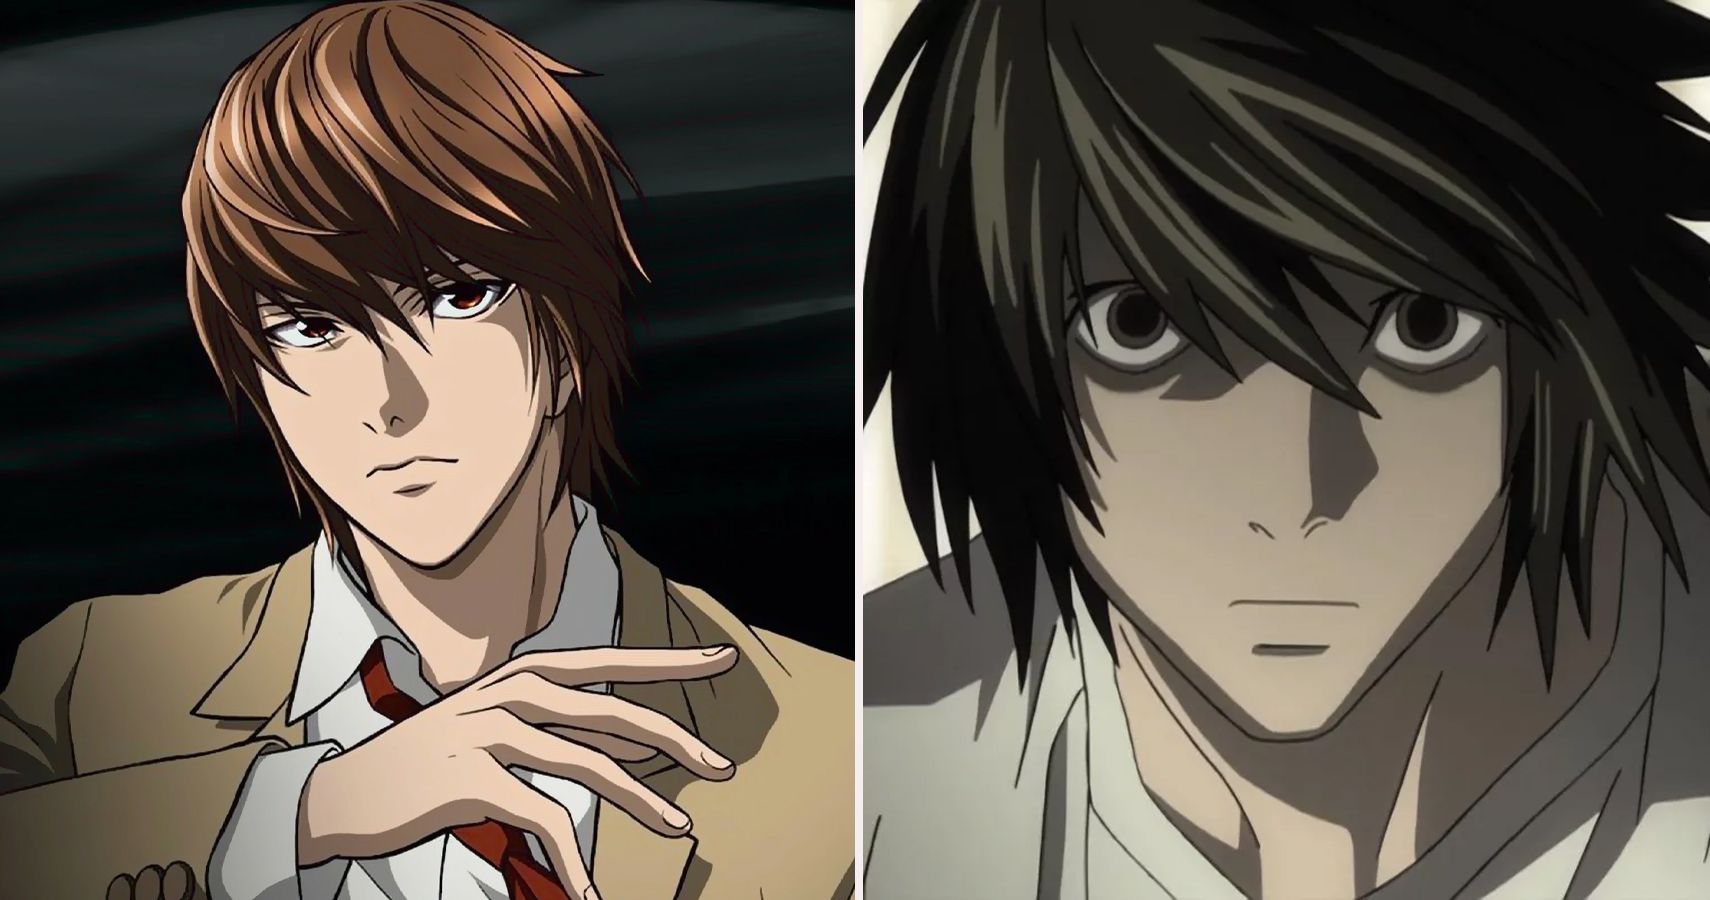 Anime guys cool Death Note Series L Character Light Yagami wallpaper   2500x1656  719776  WallpaperUP